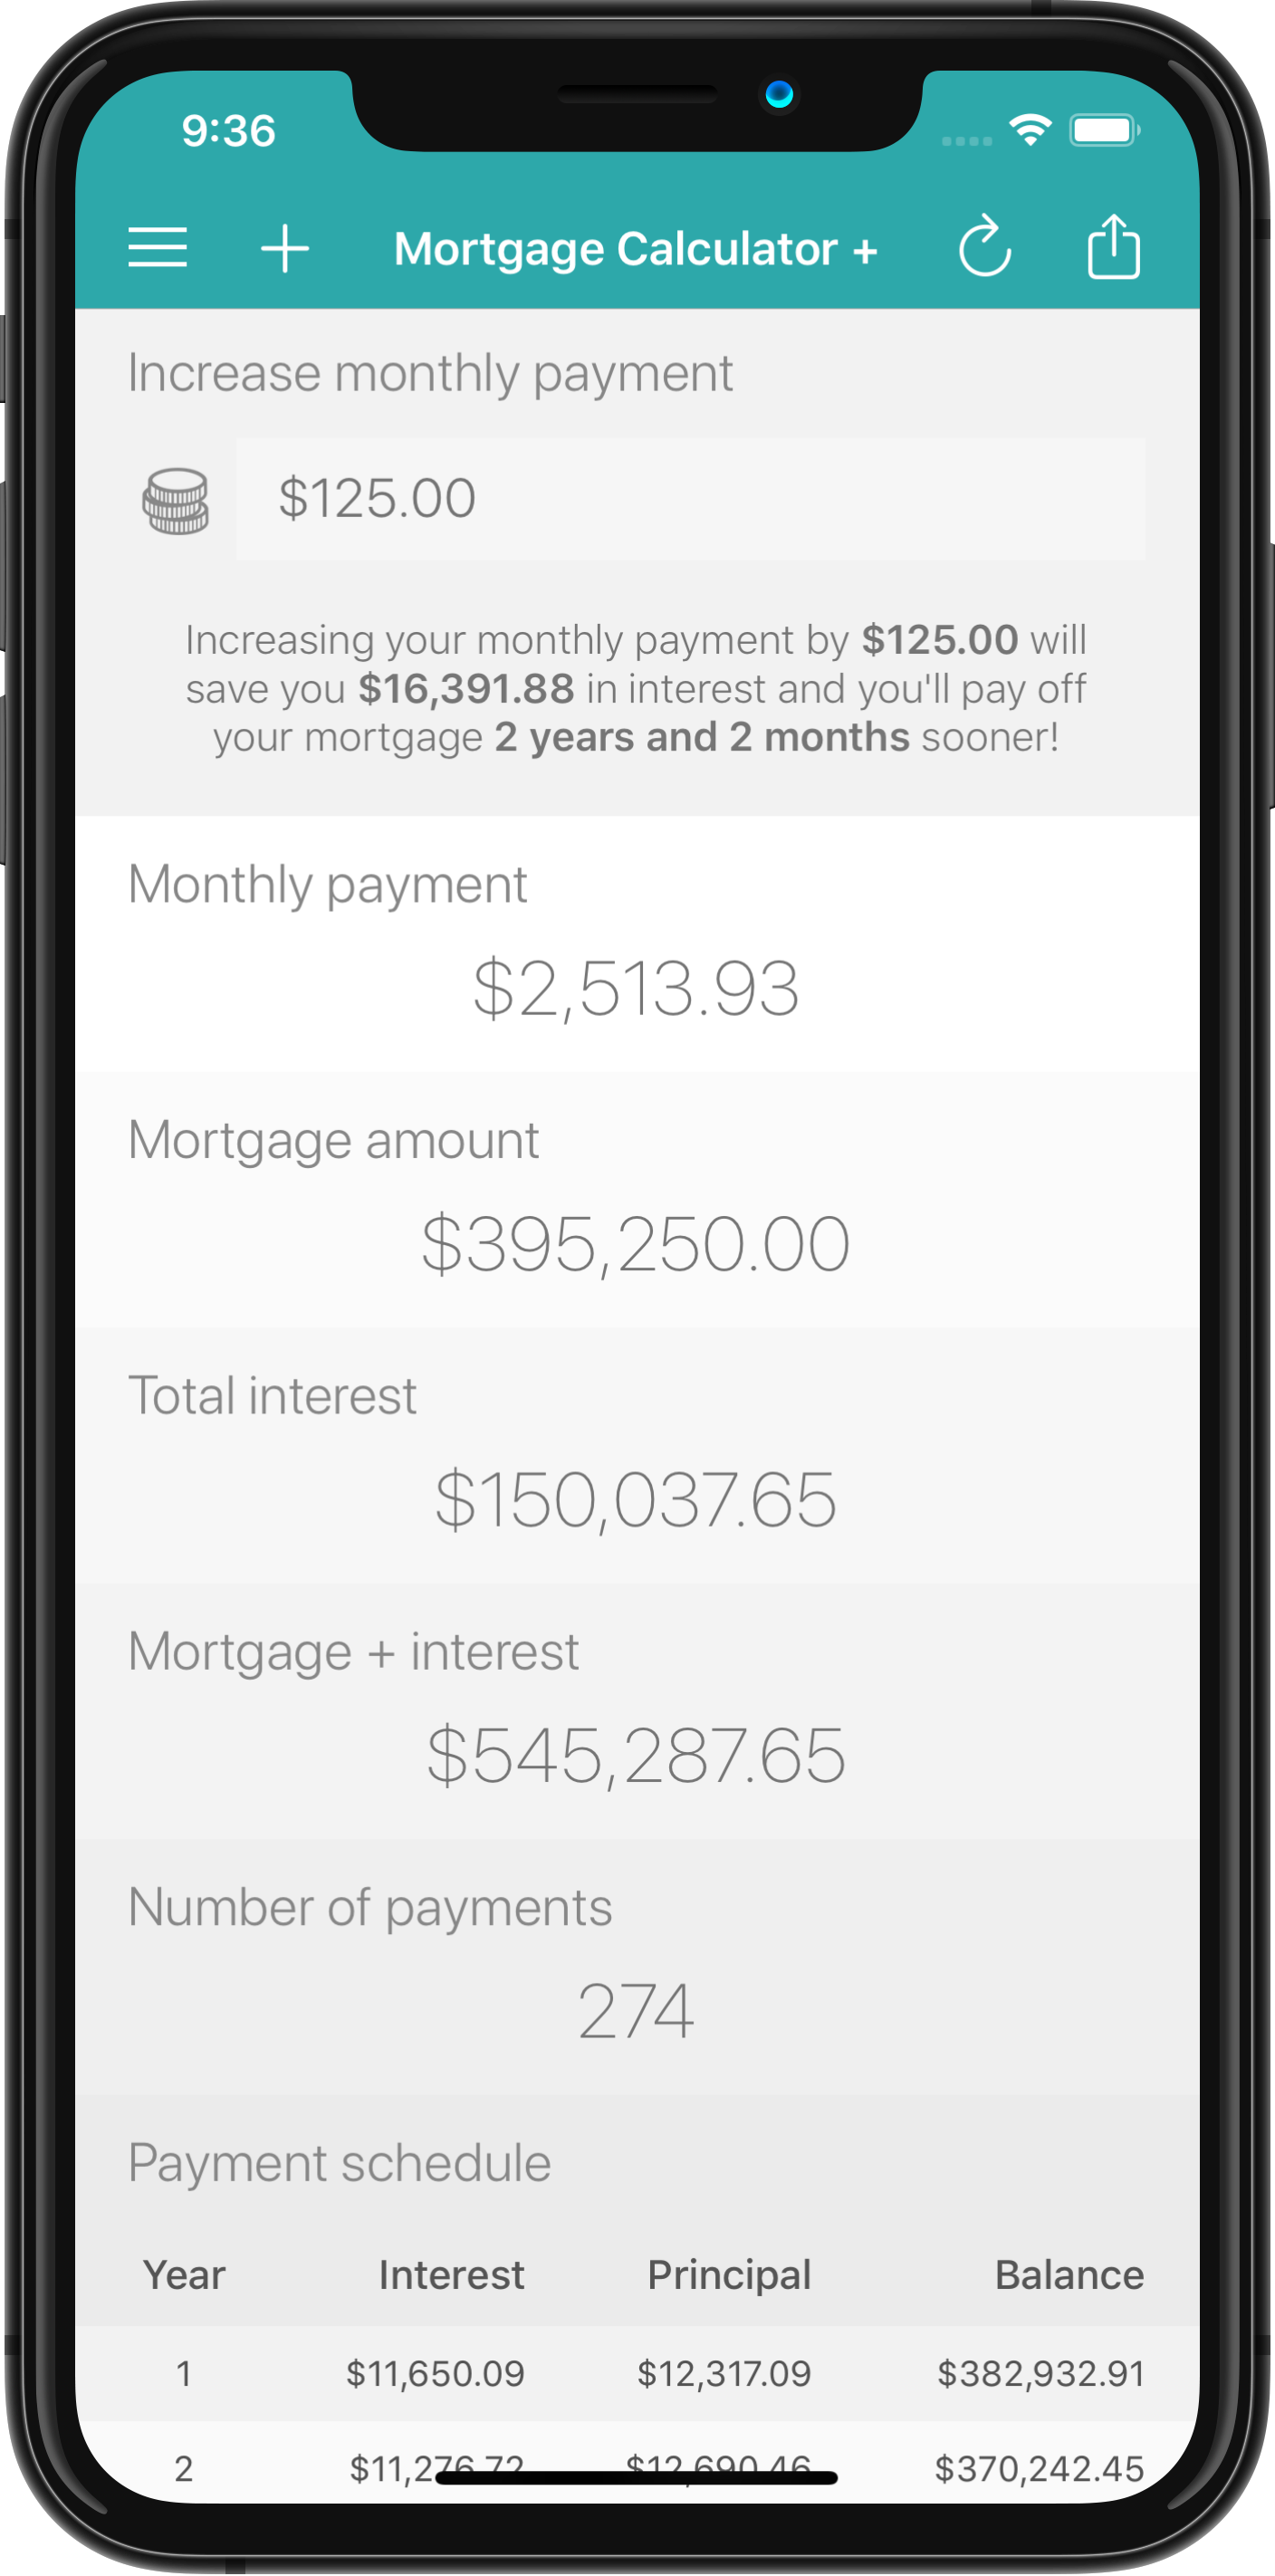 Mortgage Calculator + Increase Payments